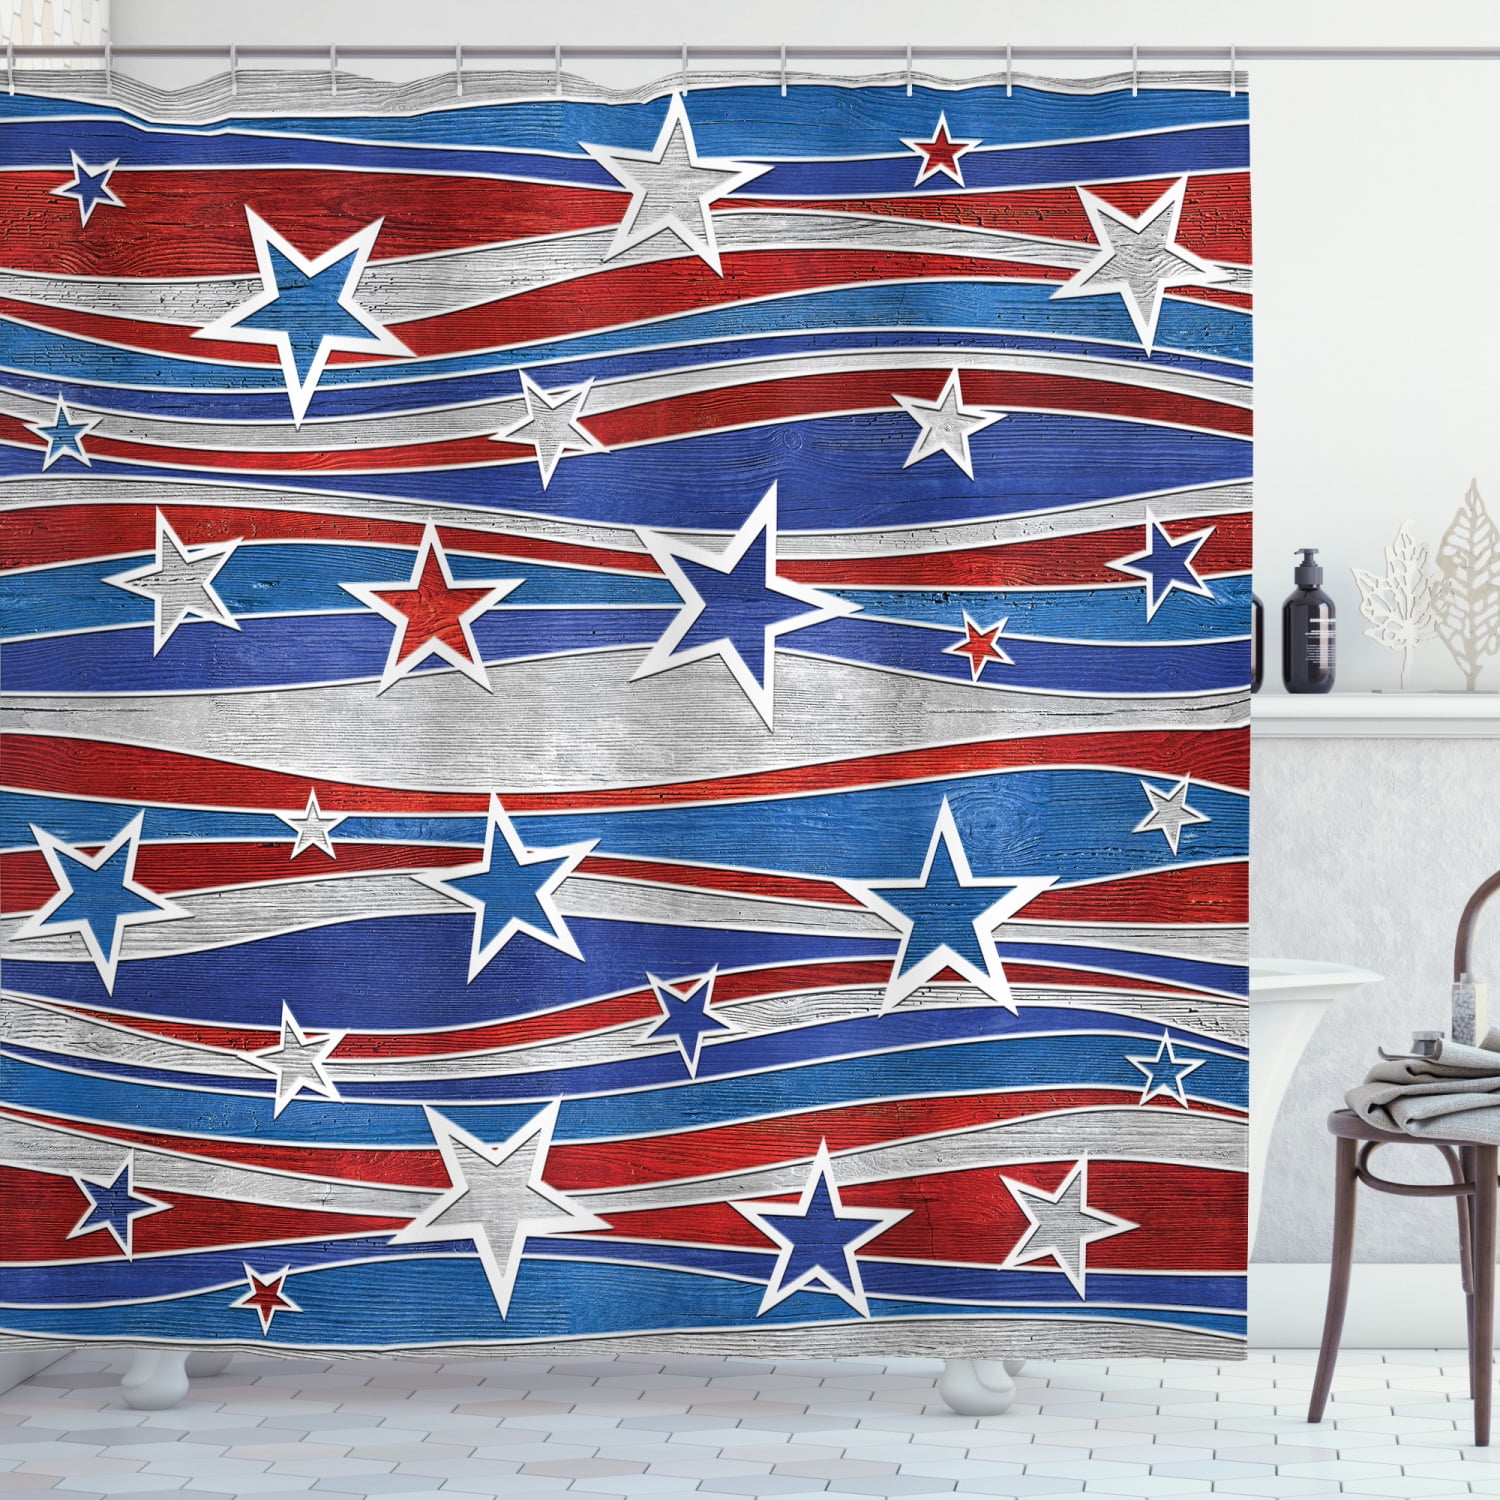 Wknoon 72 x 72 Inch Shower Curtain Set Abstract Vintage Patriotic Deer Old Forest Retro American Flag Design Art